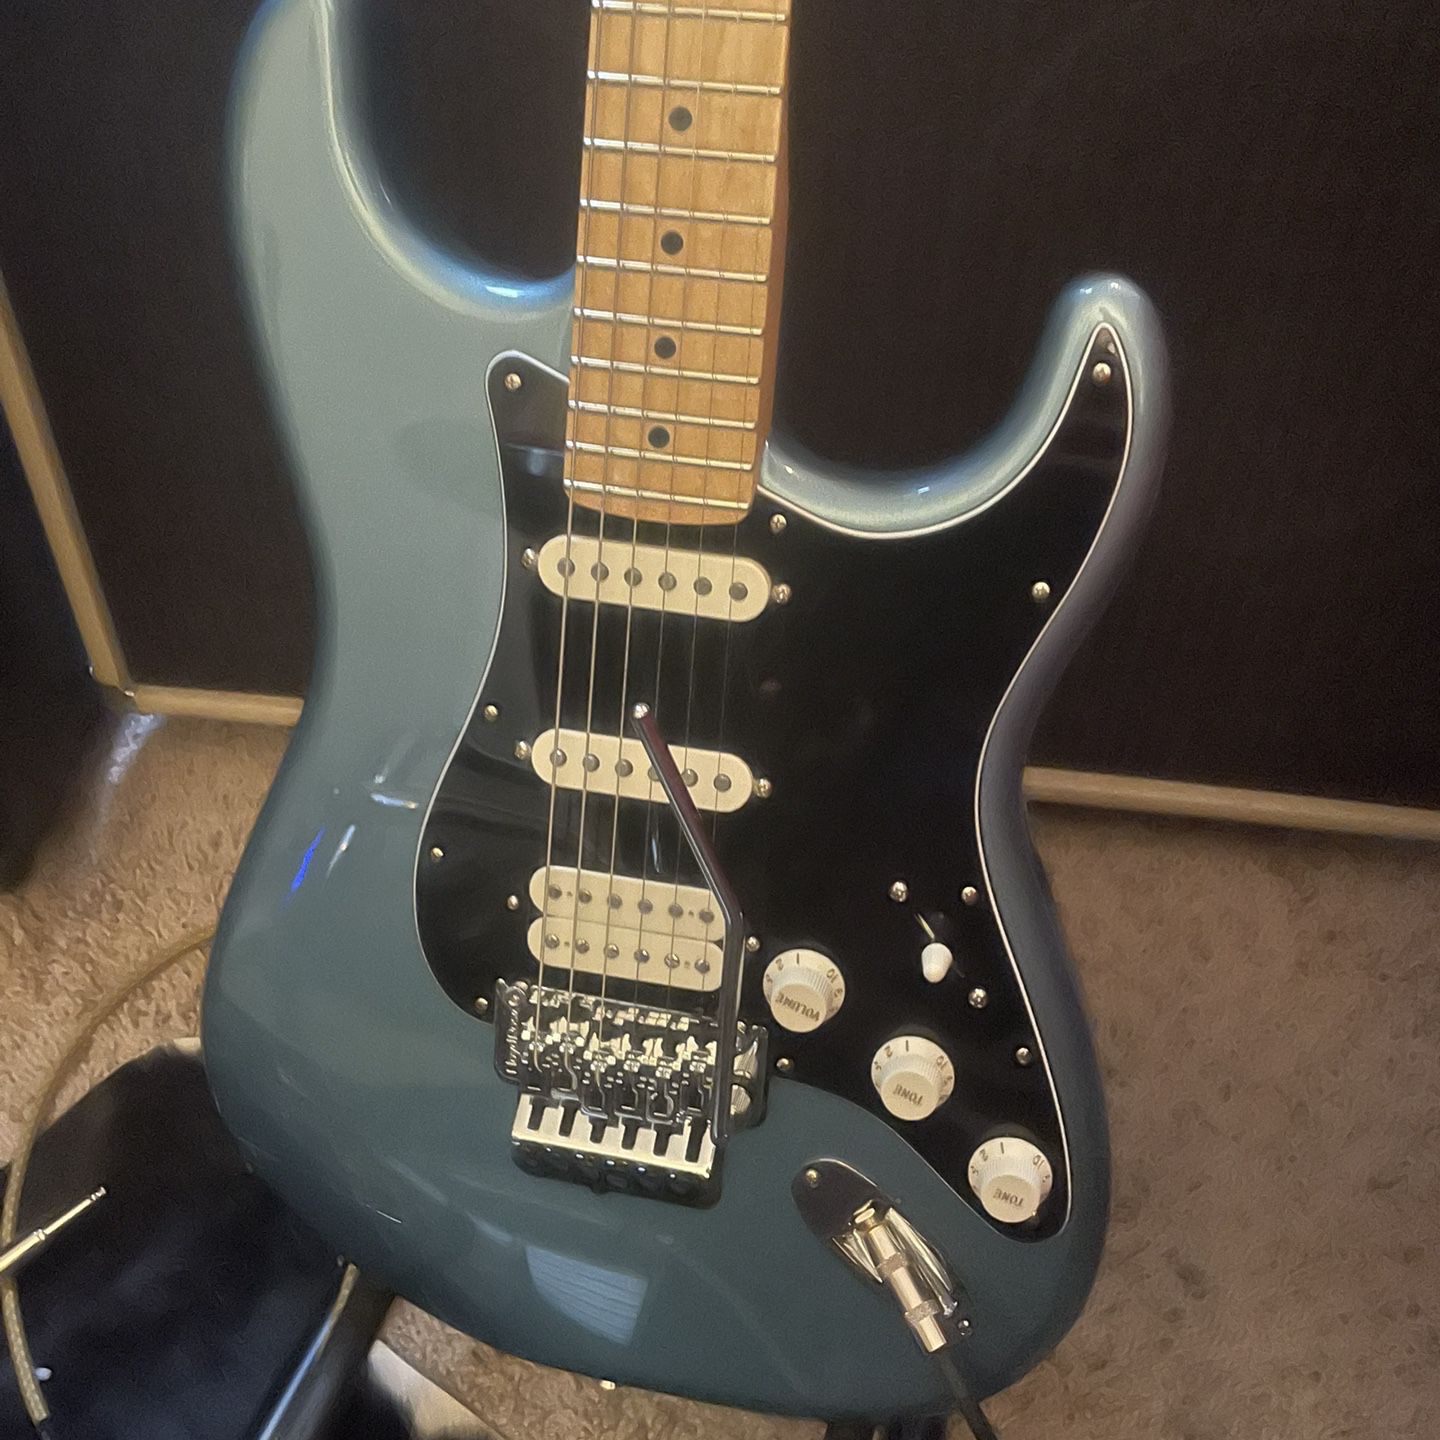 $500 Fender Stratocaster. Priced Lowered For The Next 2 Days Only